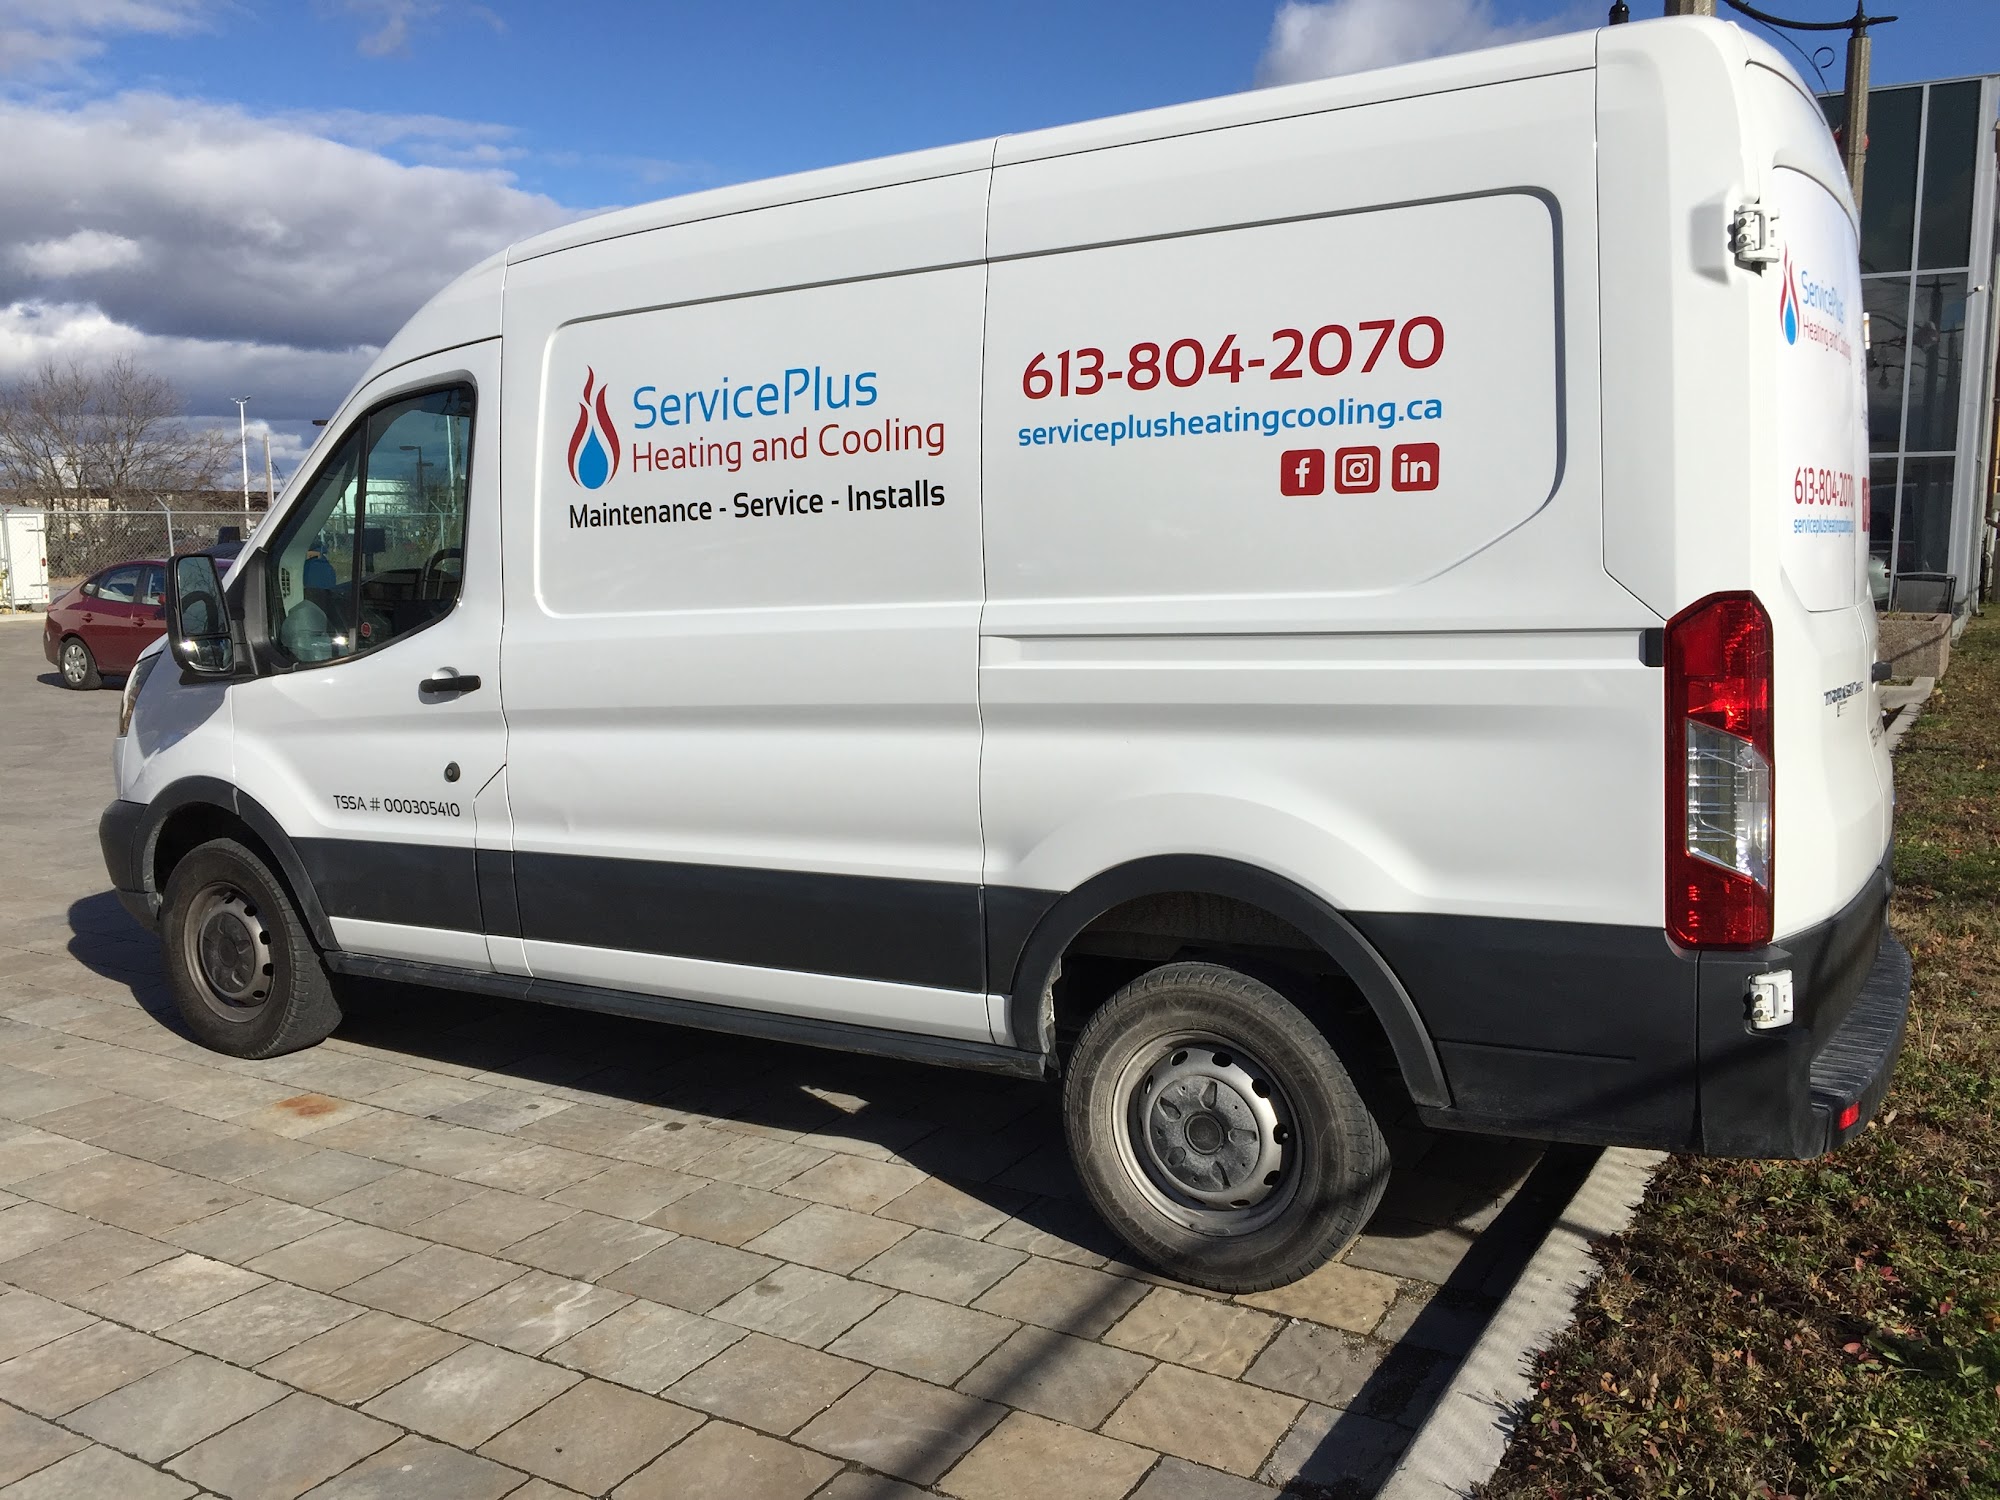 ServicePlus Heating and Cooling 2804 Concession Rd, Kemptville Ontario K0G 1J0